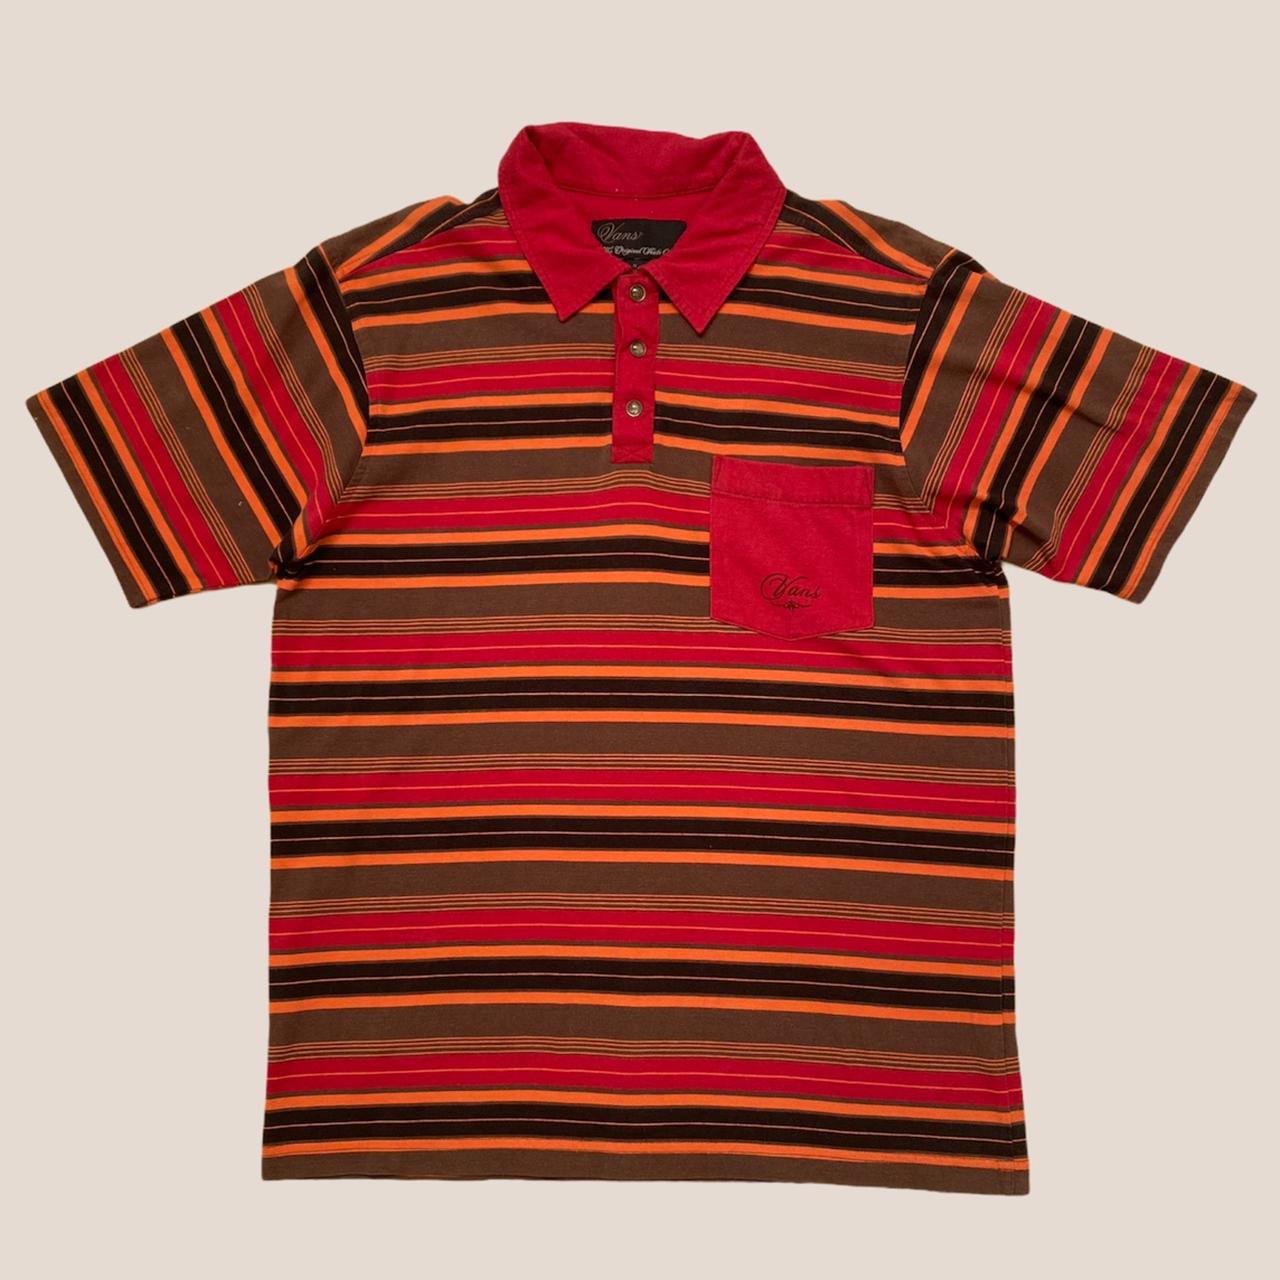 Vans Men's Red and Orange Polo-shirts